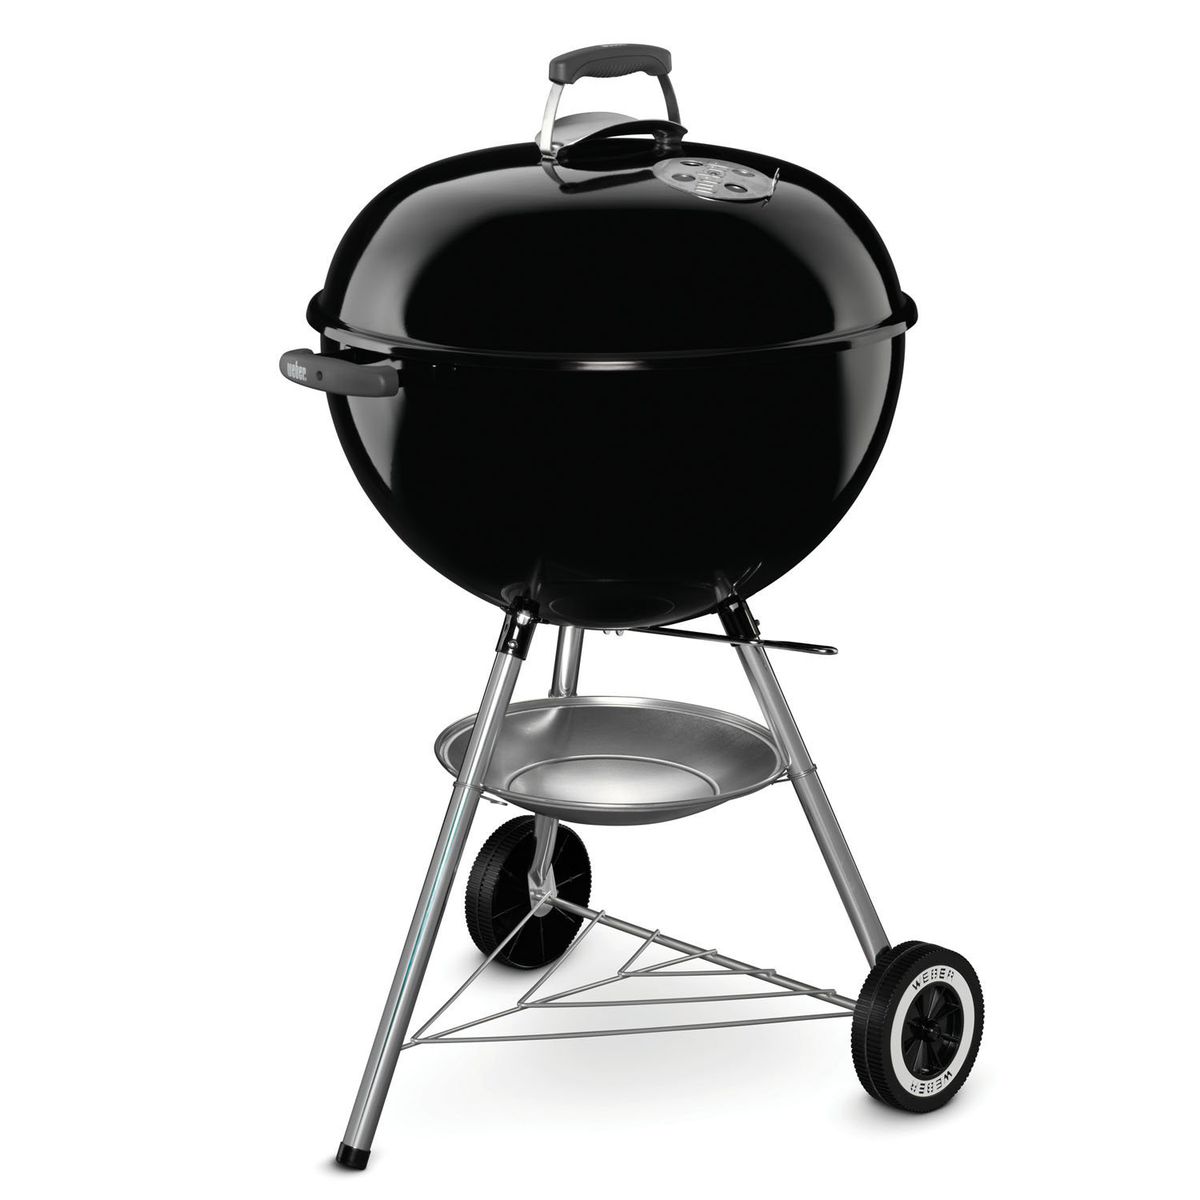 Weber 741001 Original Kettle 22-Inch Charcoal Grill